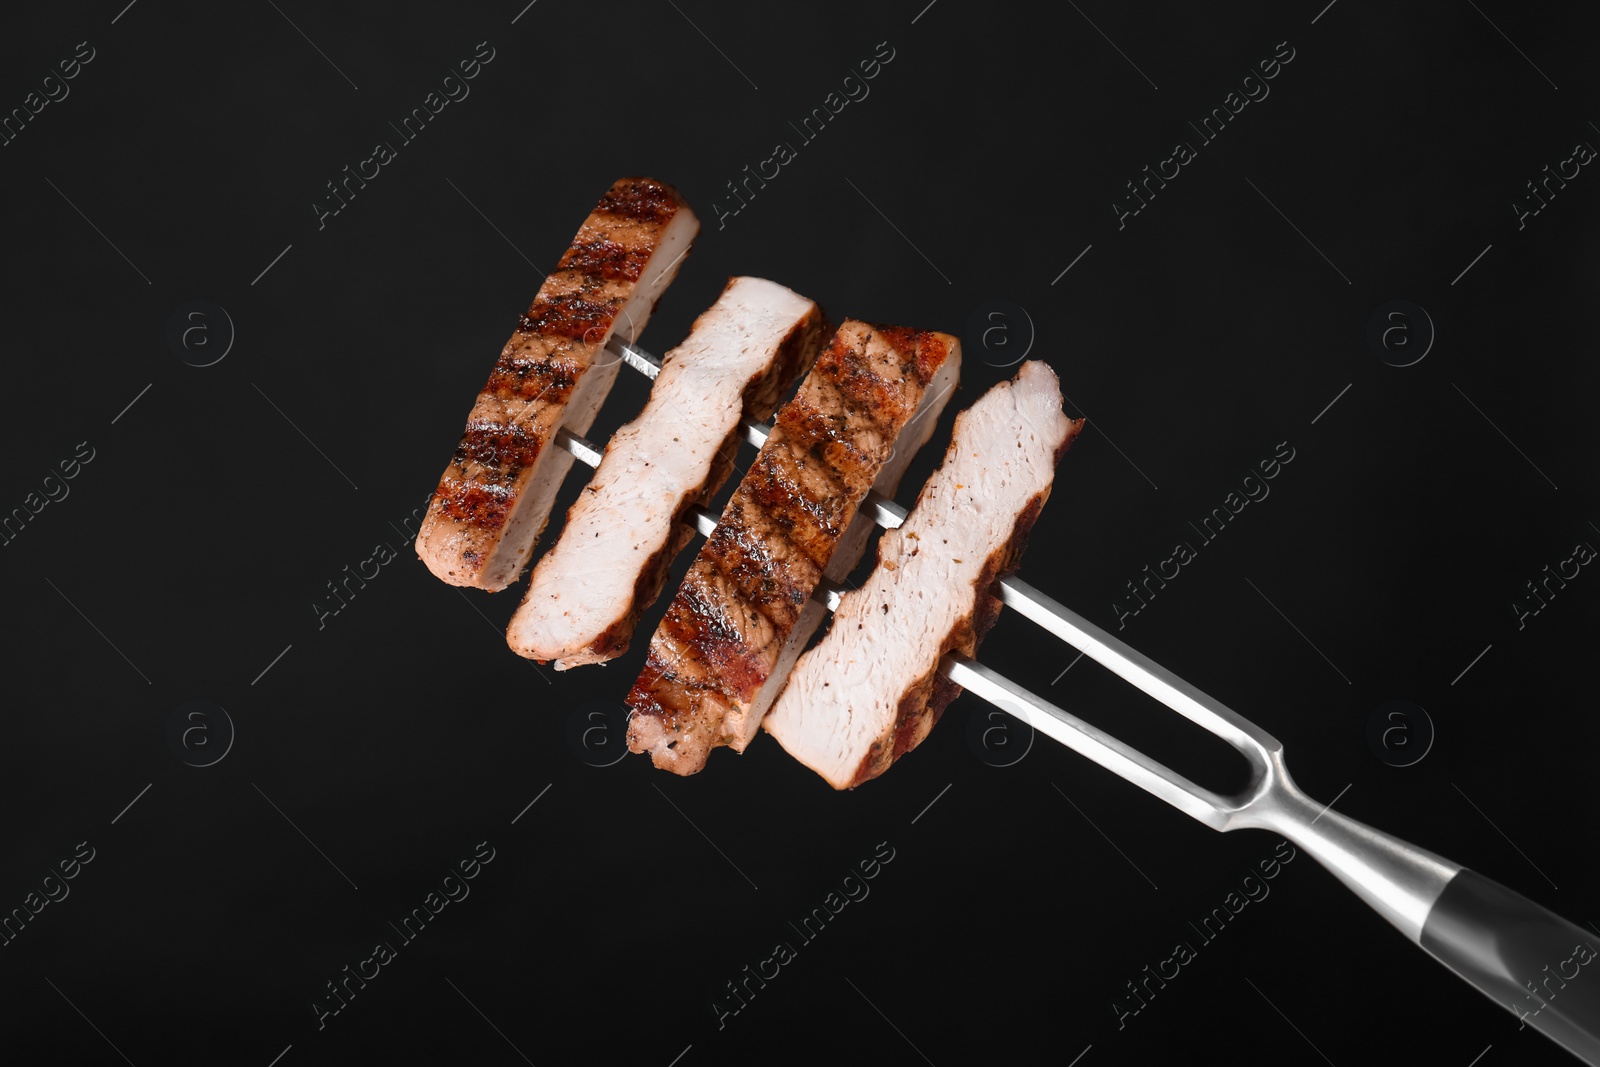 Photo of Carving fork with cut grilled pork steak pieces against black background